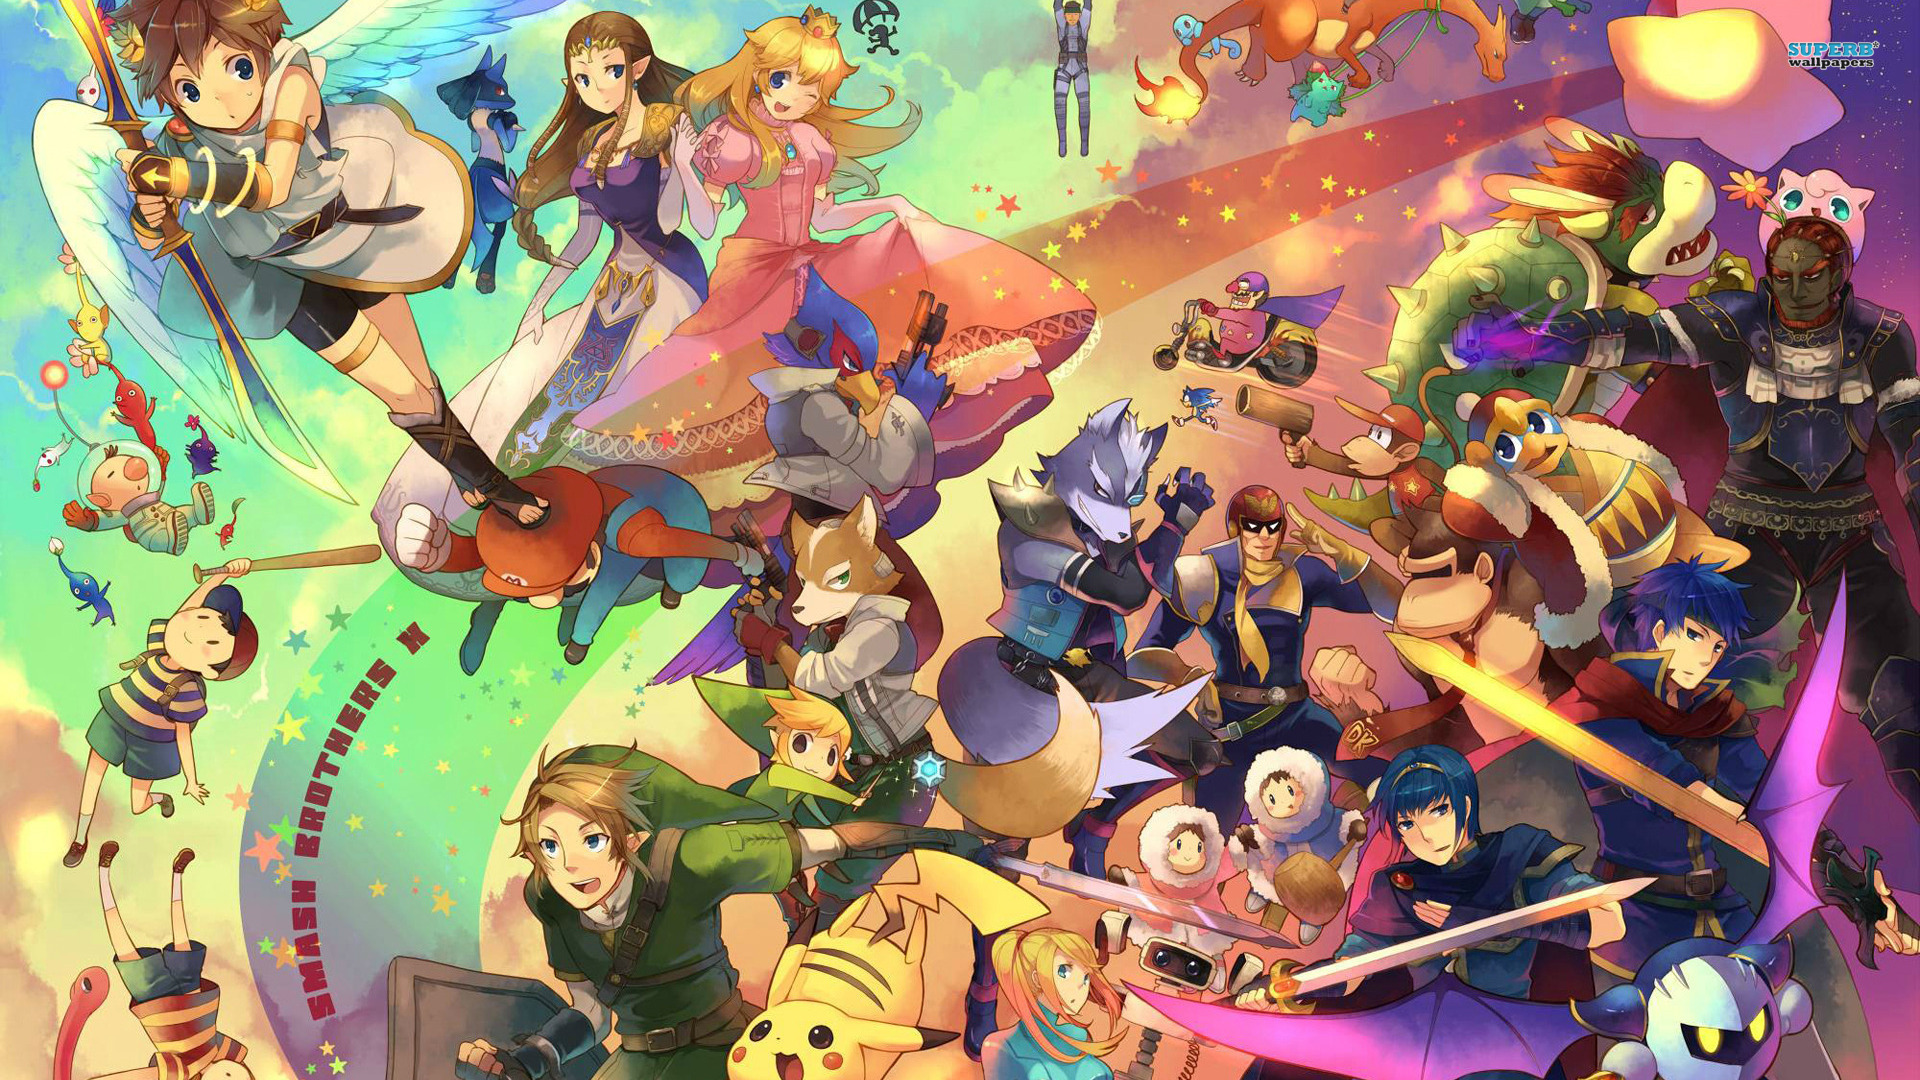 Super Smash Bros. For Nintendo 3ds And Wii U Computer Wallpapers